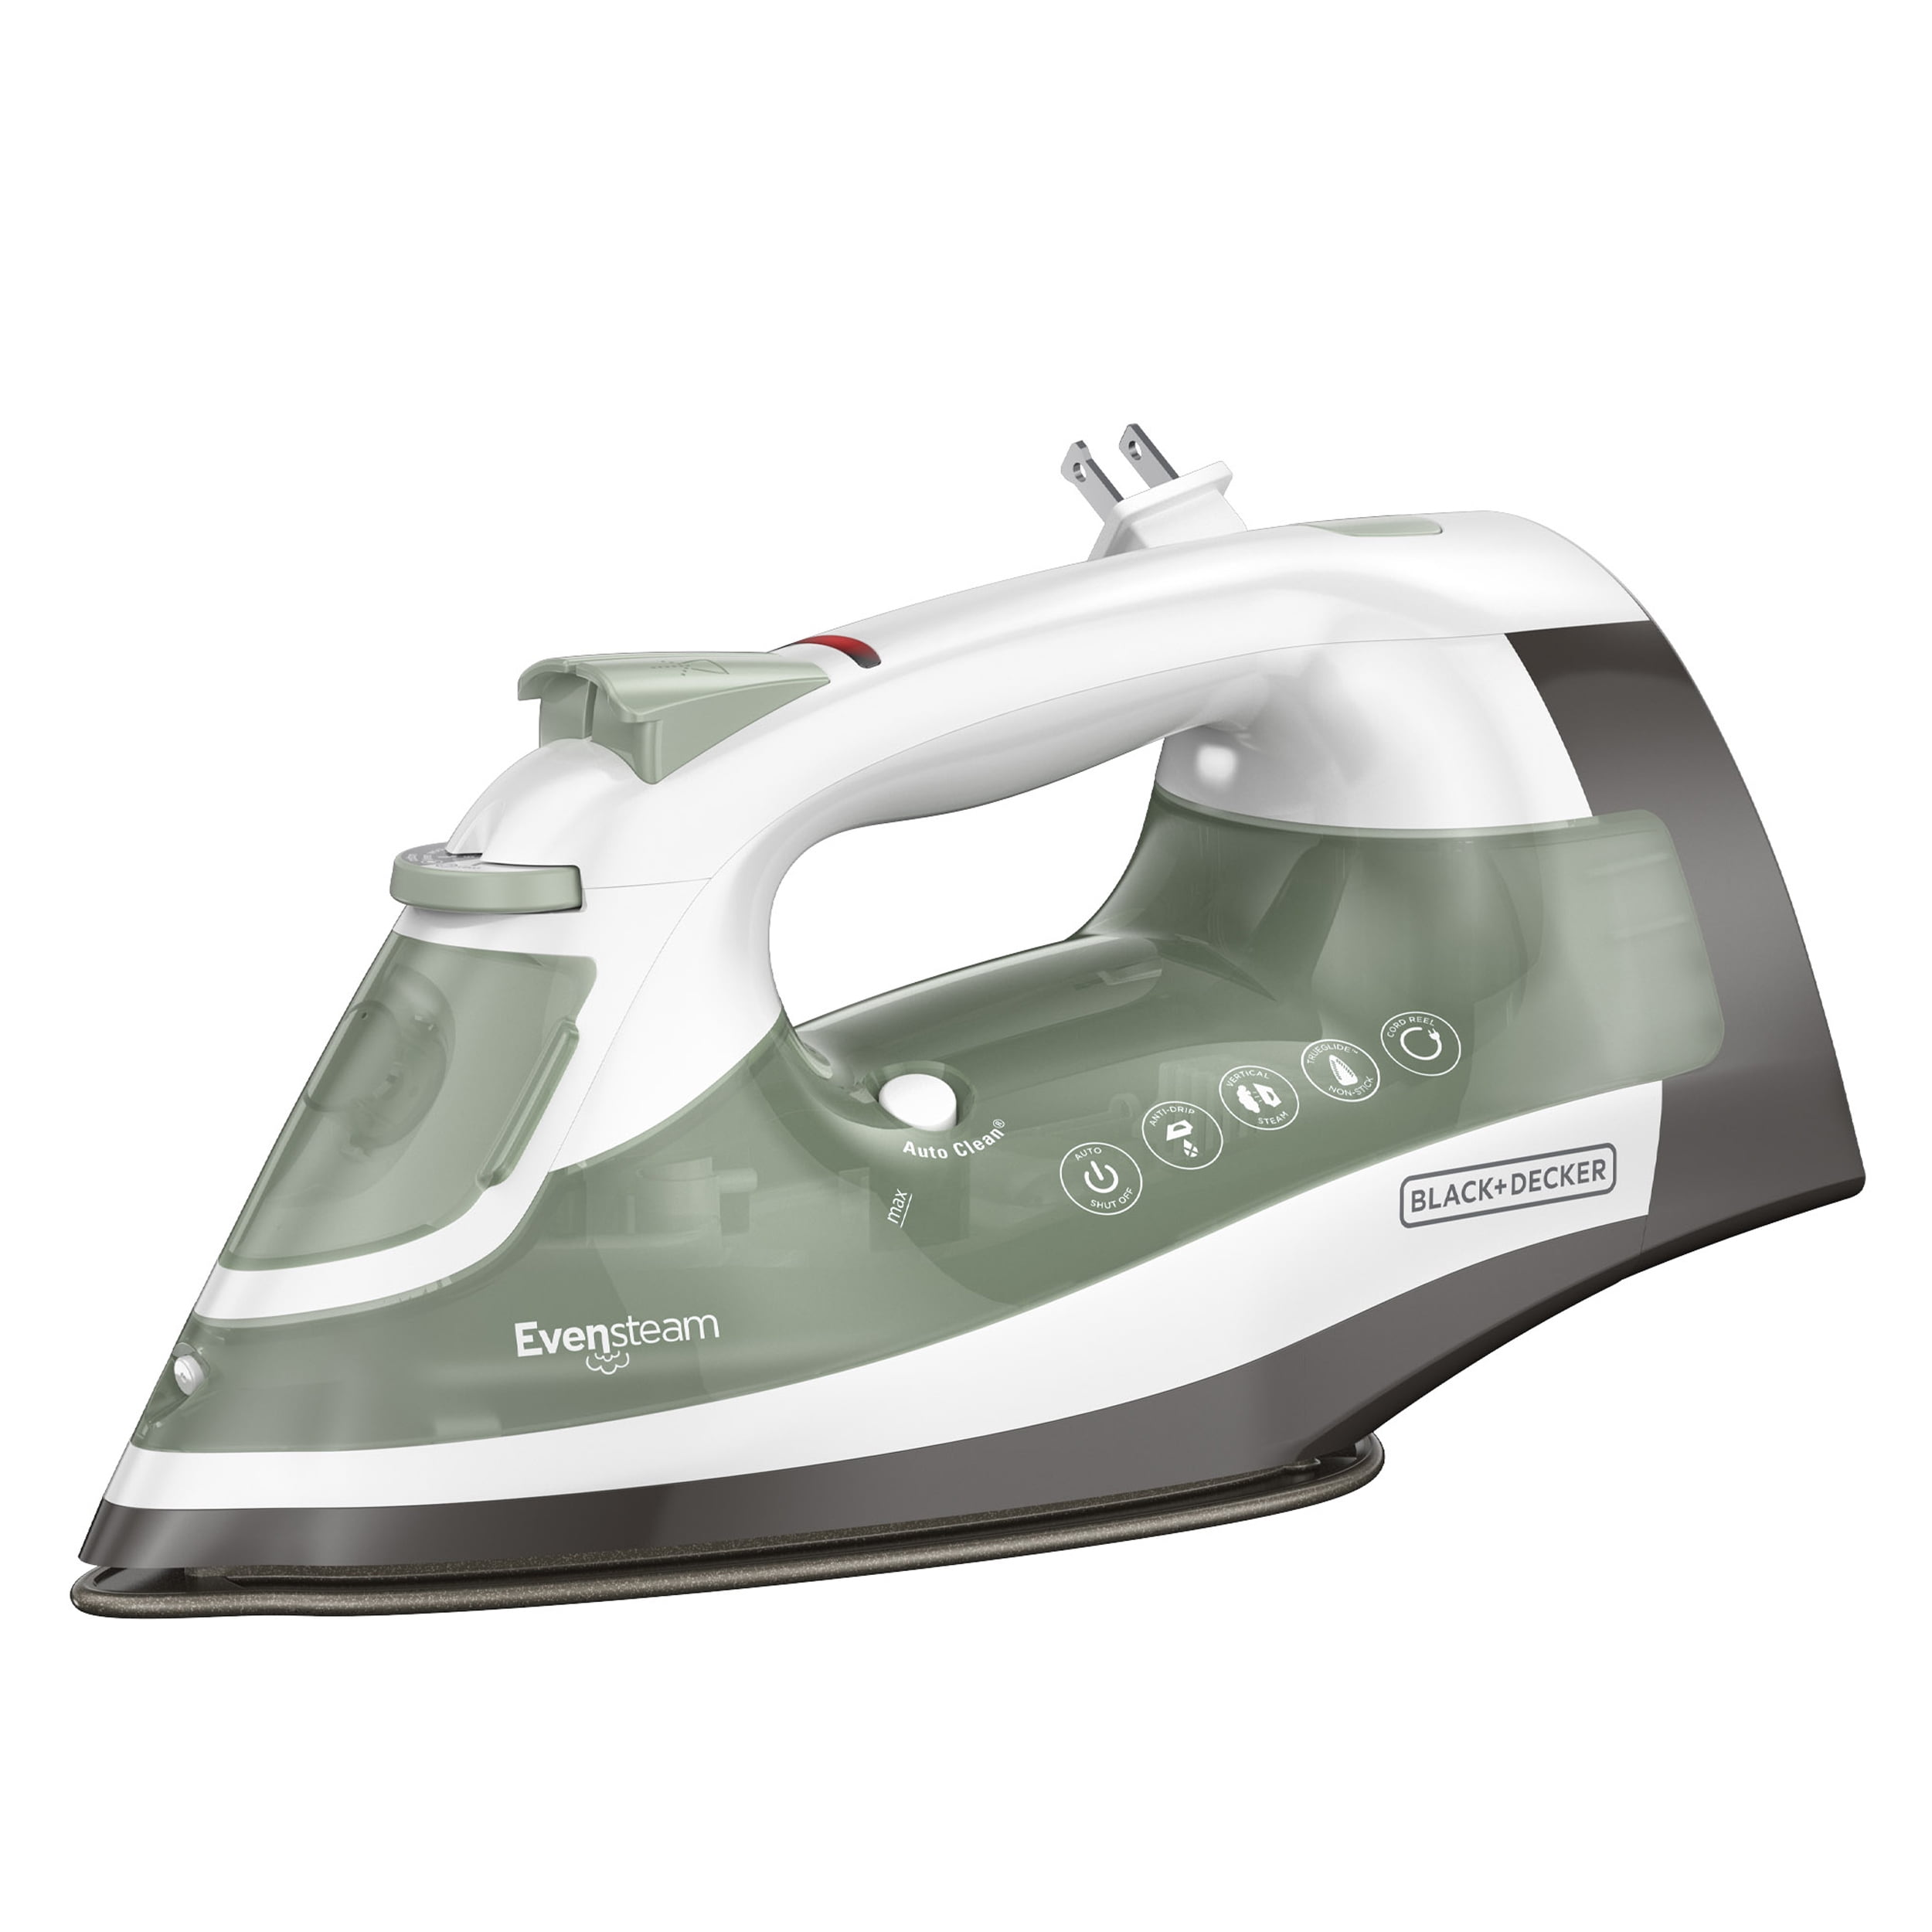 Product Review – Black + Decker One Step Steam Iron – Model IR18XS